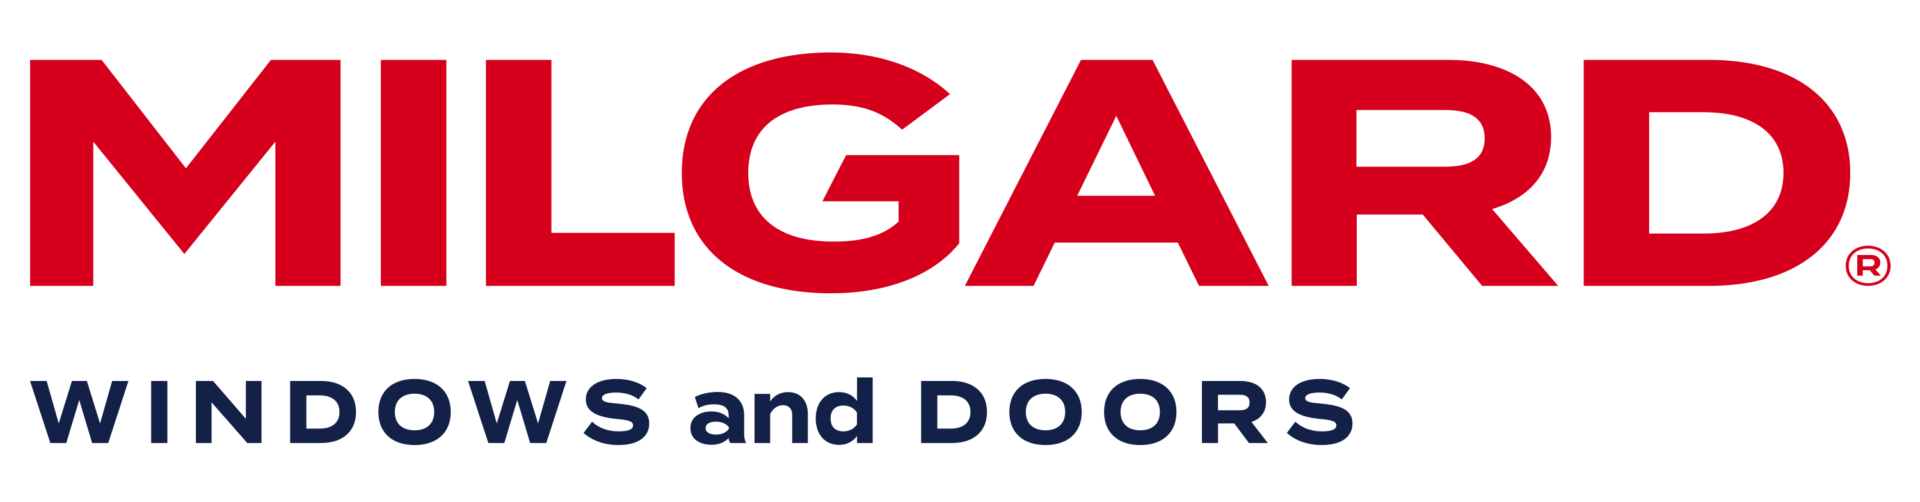 A green background with red letters that say " garage door and door repair ".